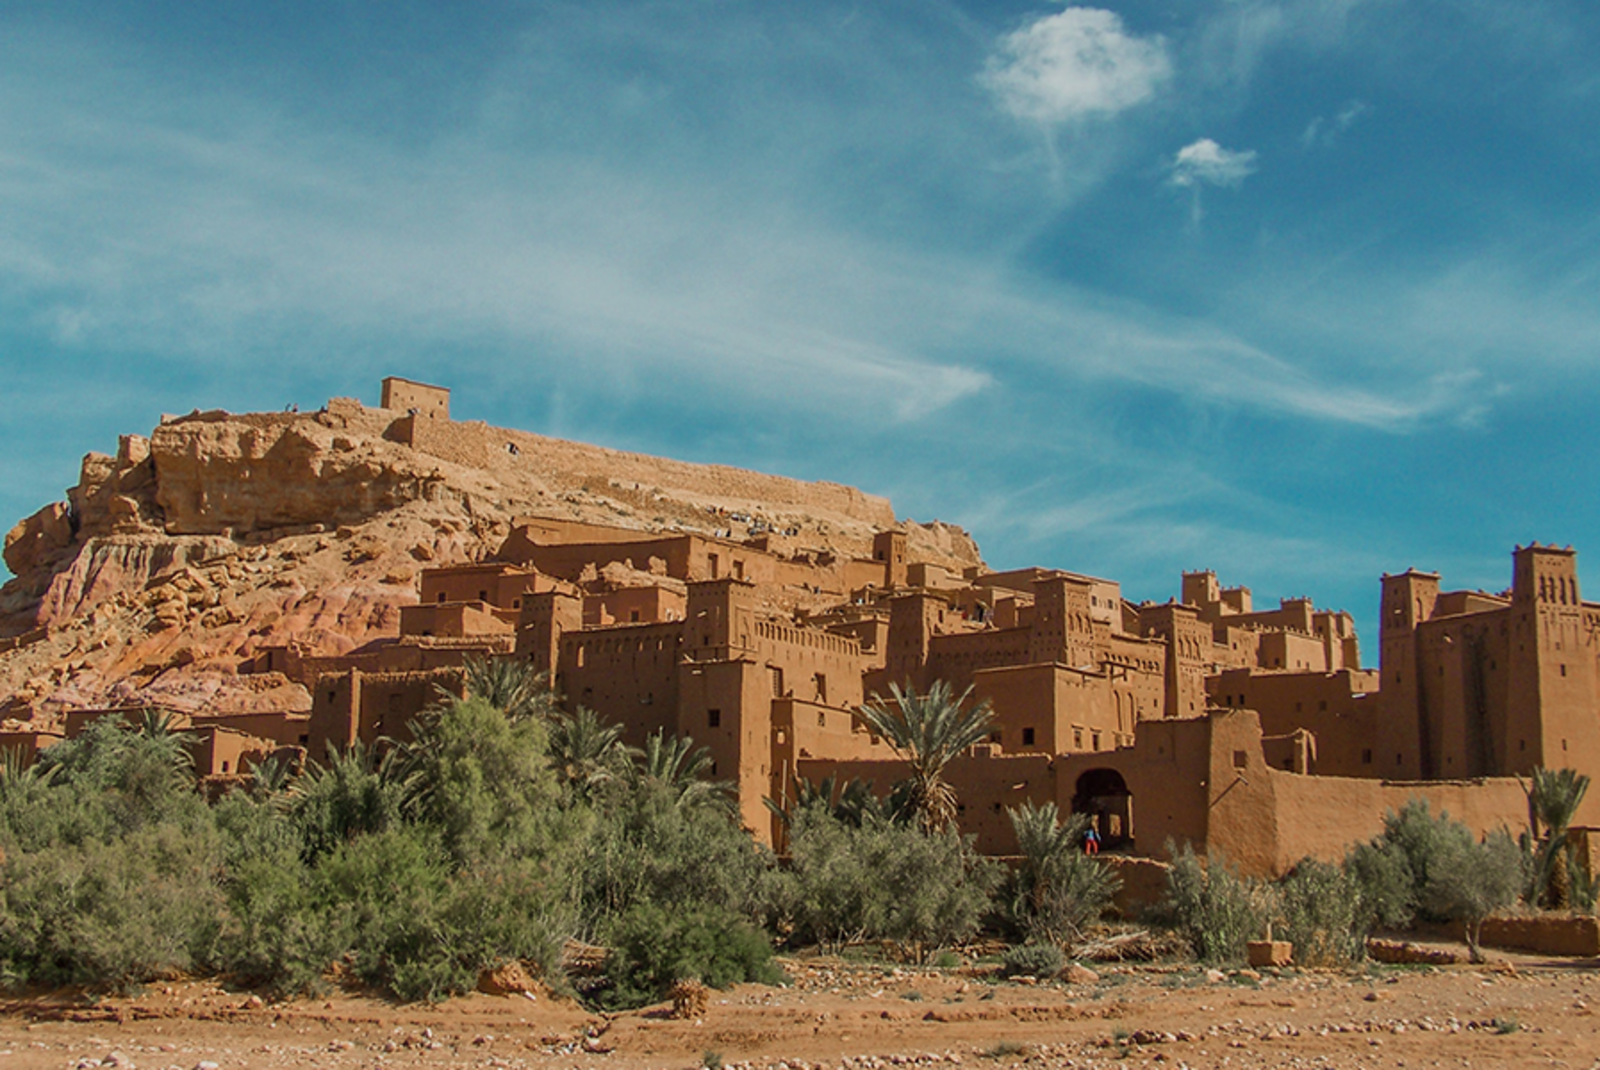 Culture and Relaxation in Morocco: 10-Day Itinerary - Day 7: Visit Ouarzazate